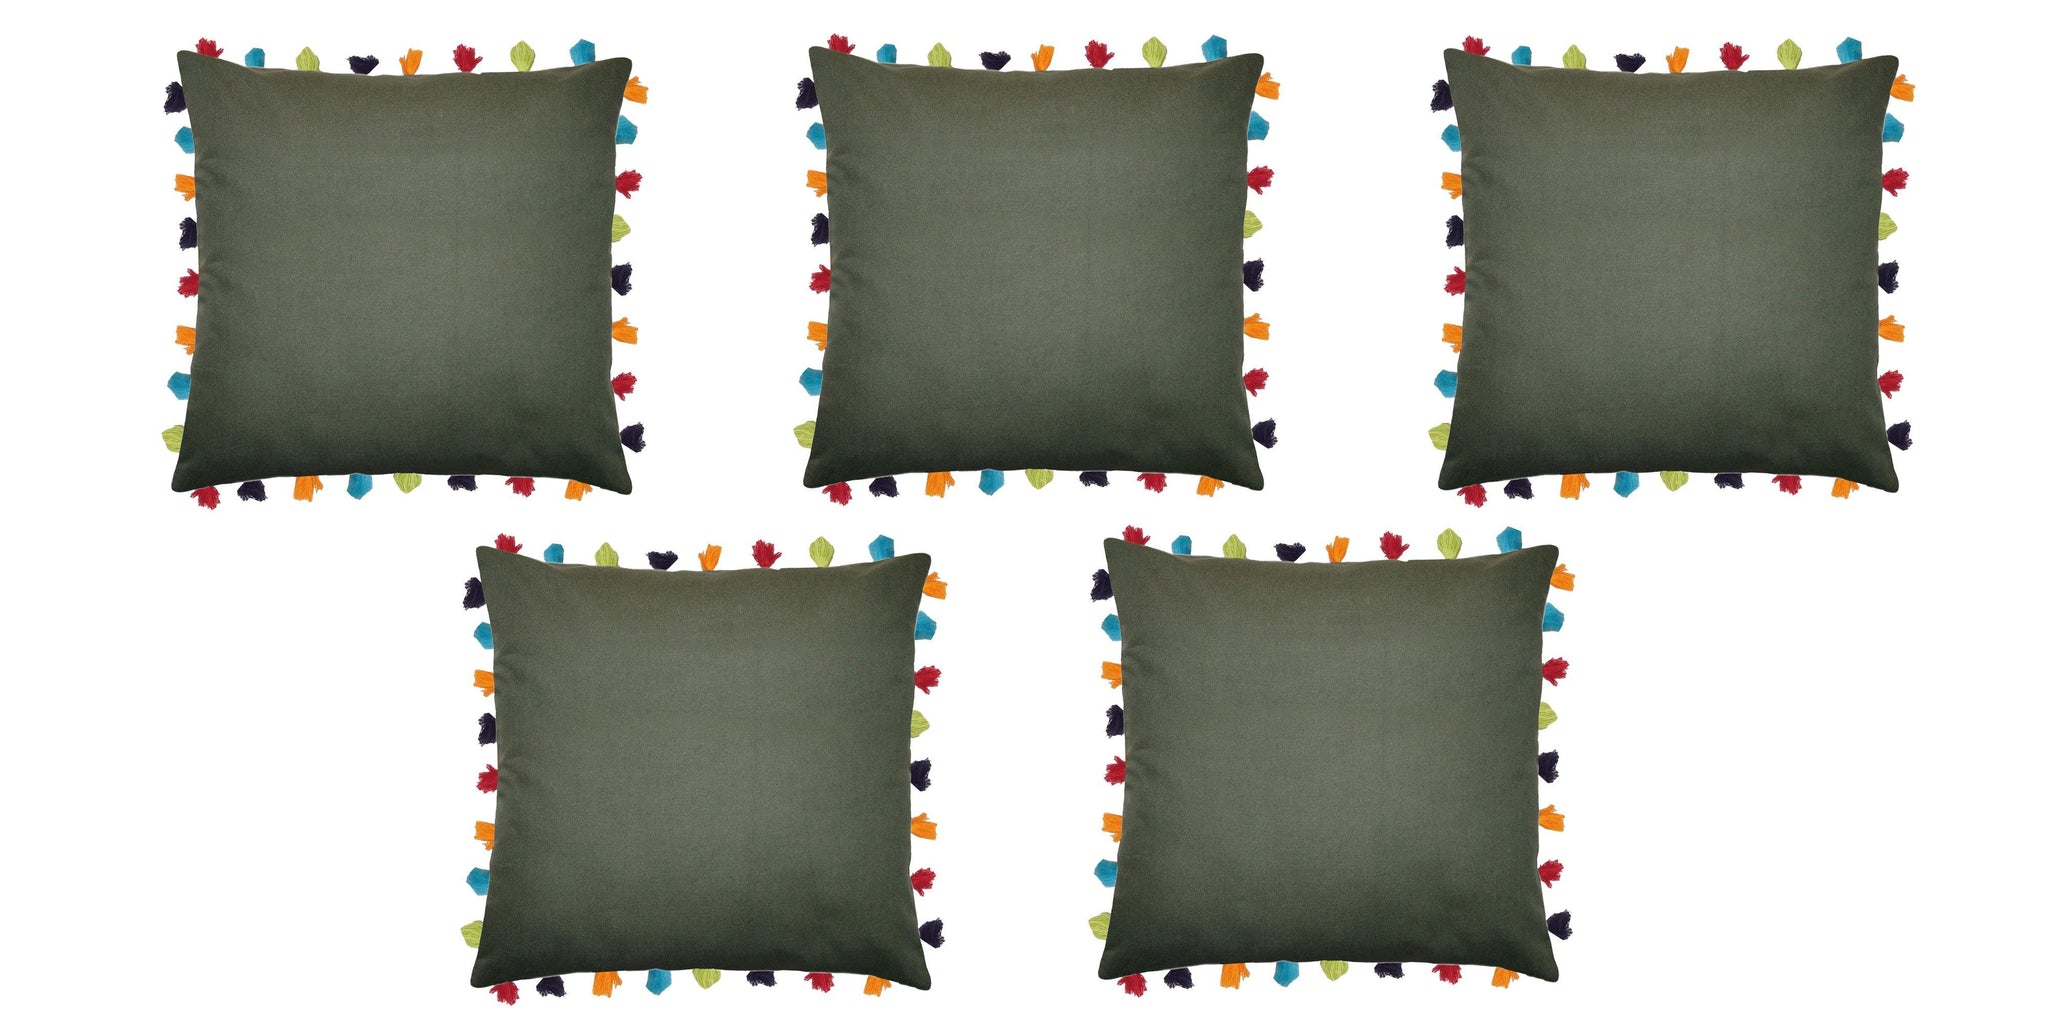 Lushomes Vineyard Green Cushion Cover with Colorful tassels (5 pcs, 24 x 24”) - Lushomes